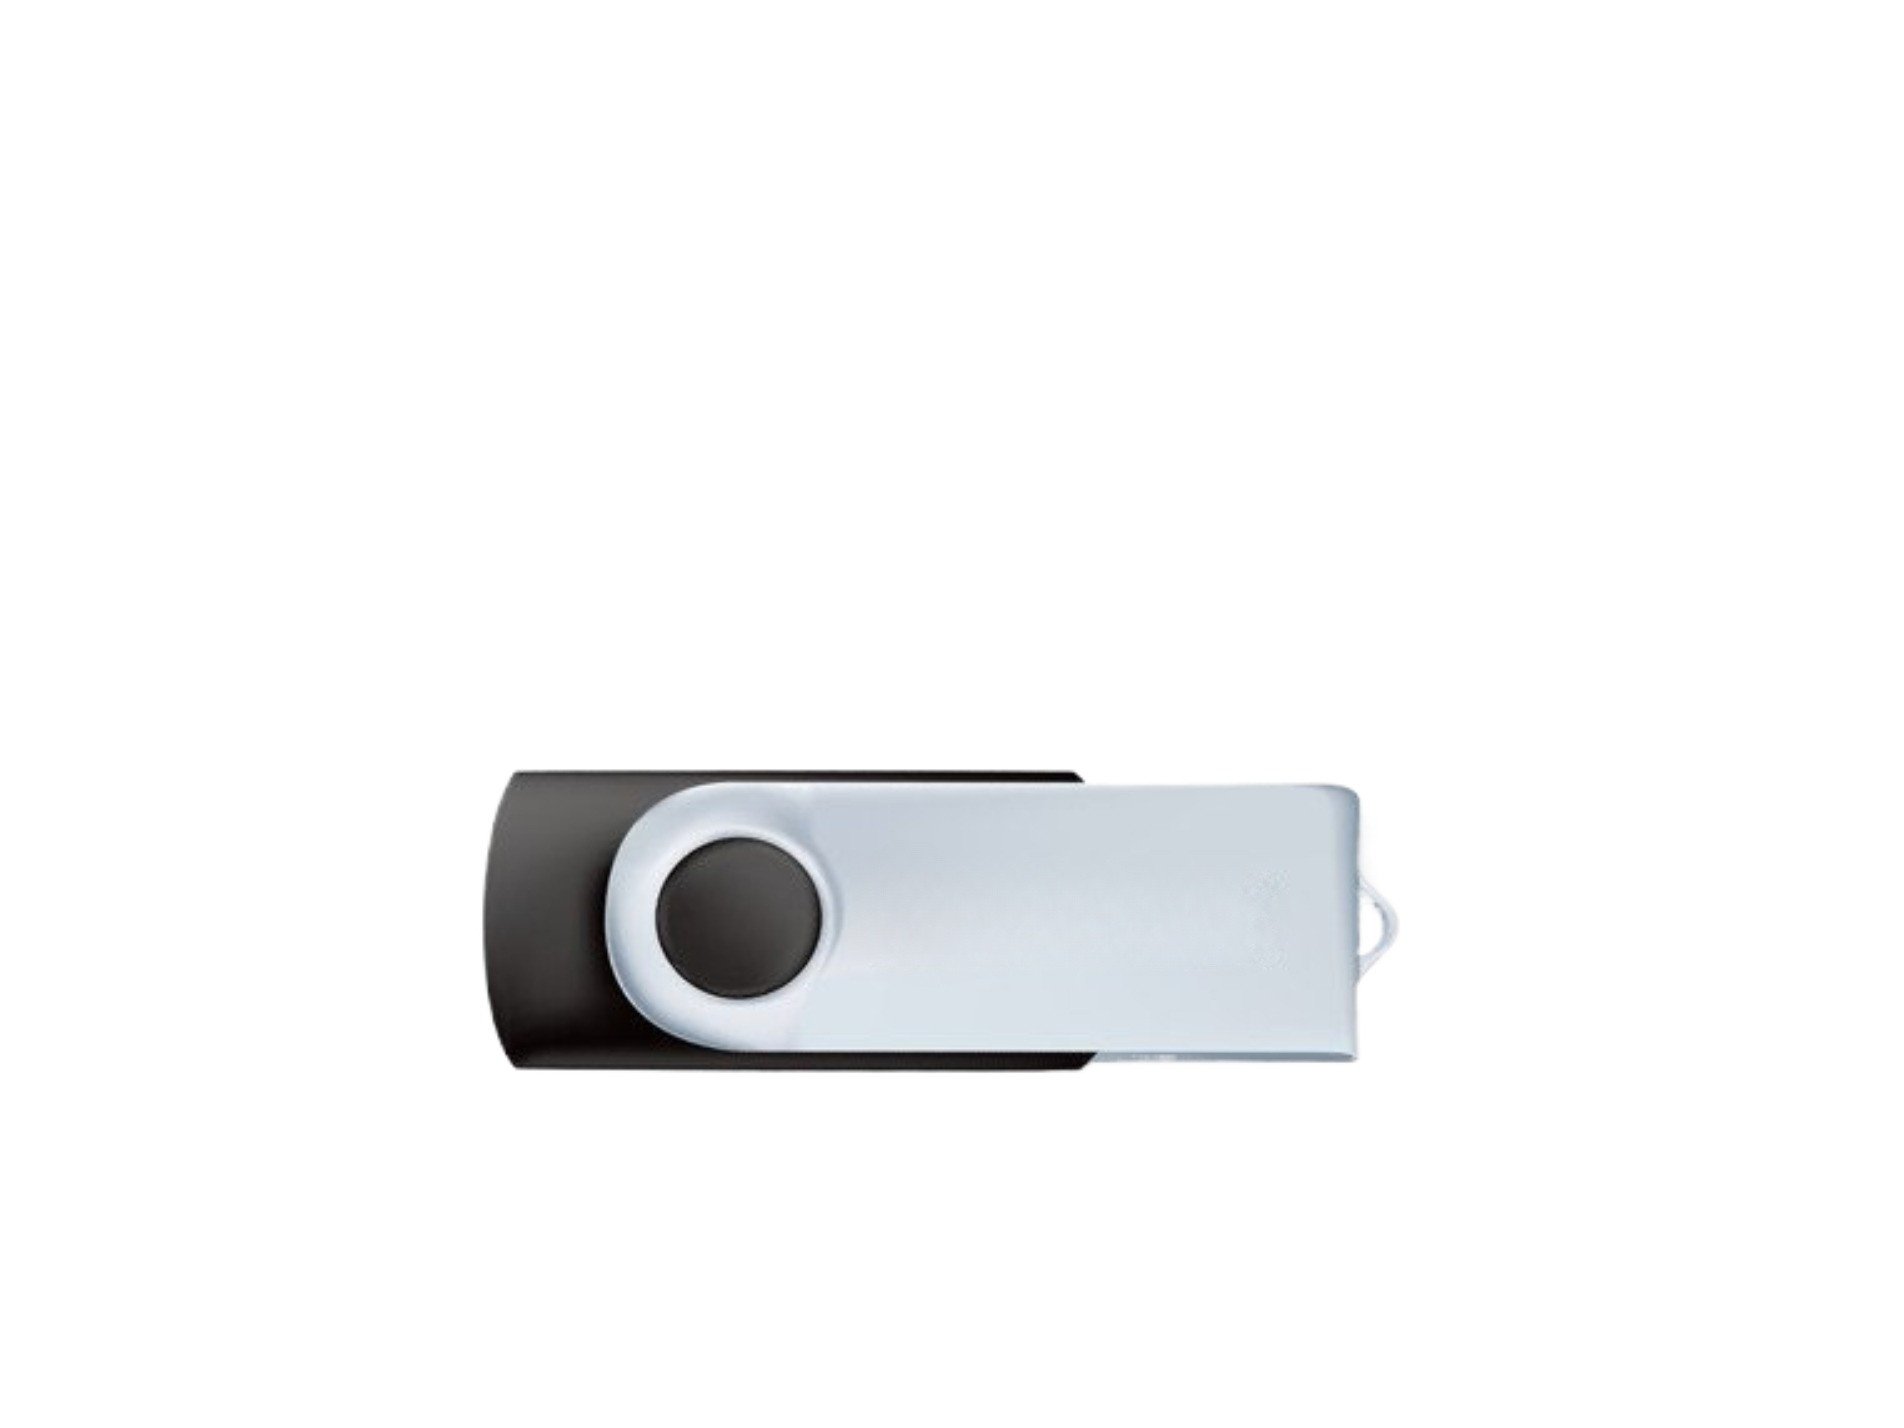 Ketron Pendrive 2016 Style POP - flash drive with additional pop styles